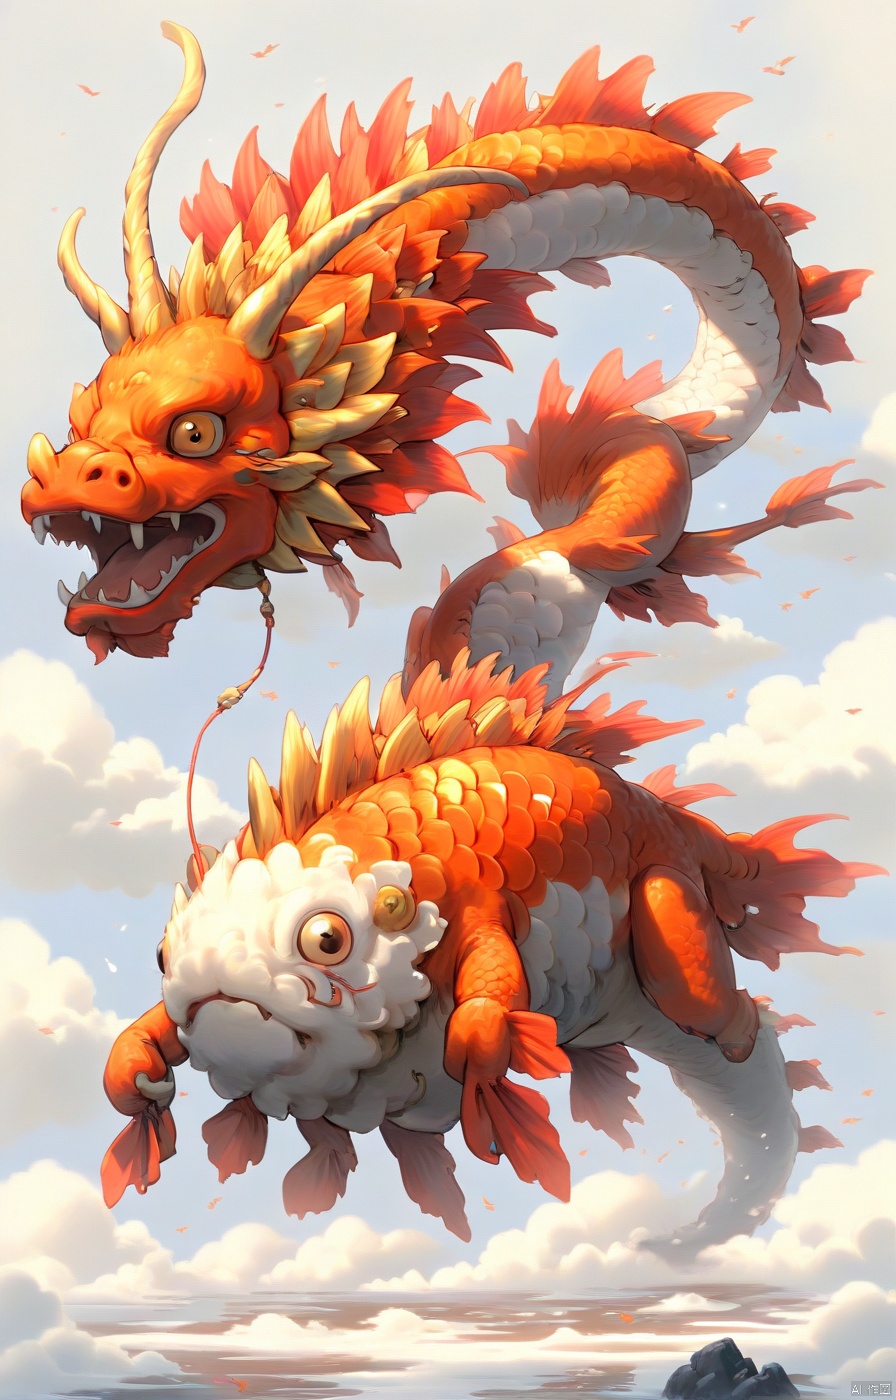  /imagine prompt: Simple background with a clear sky, featuring a single head with two yellow eyes and two horns on top, two pair of legs along with claws, red scales, and a golden body. No human figures present, only an Eastern dragon depicted in a side view, flying upright. The image is artisticallydetailed.::,中国龙, dofas, Arien view, shanhaijing, fnk, KOI, recolor